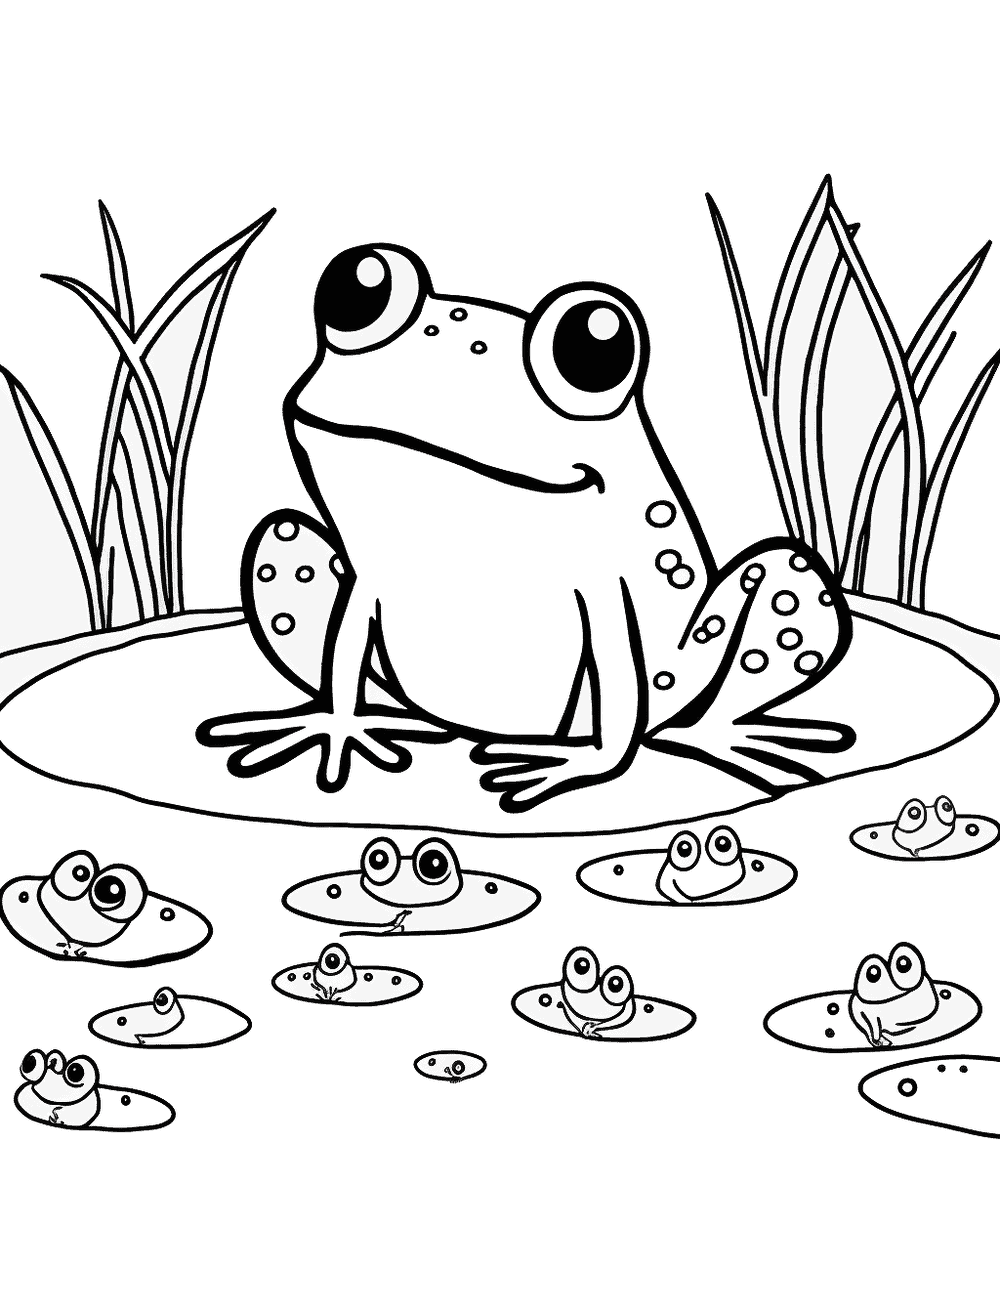 Frogs In A Pond Coloring Page - A group of frogs swimming and playing in a pond